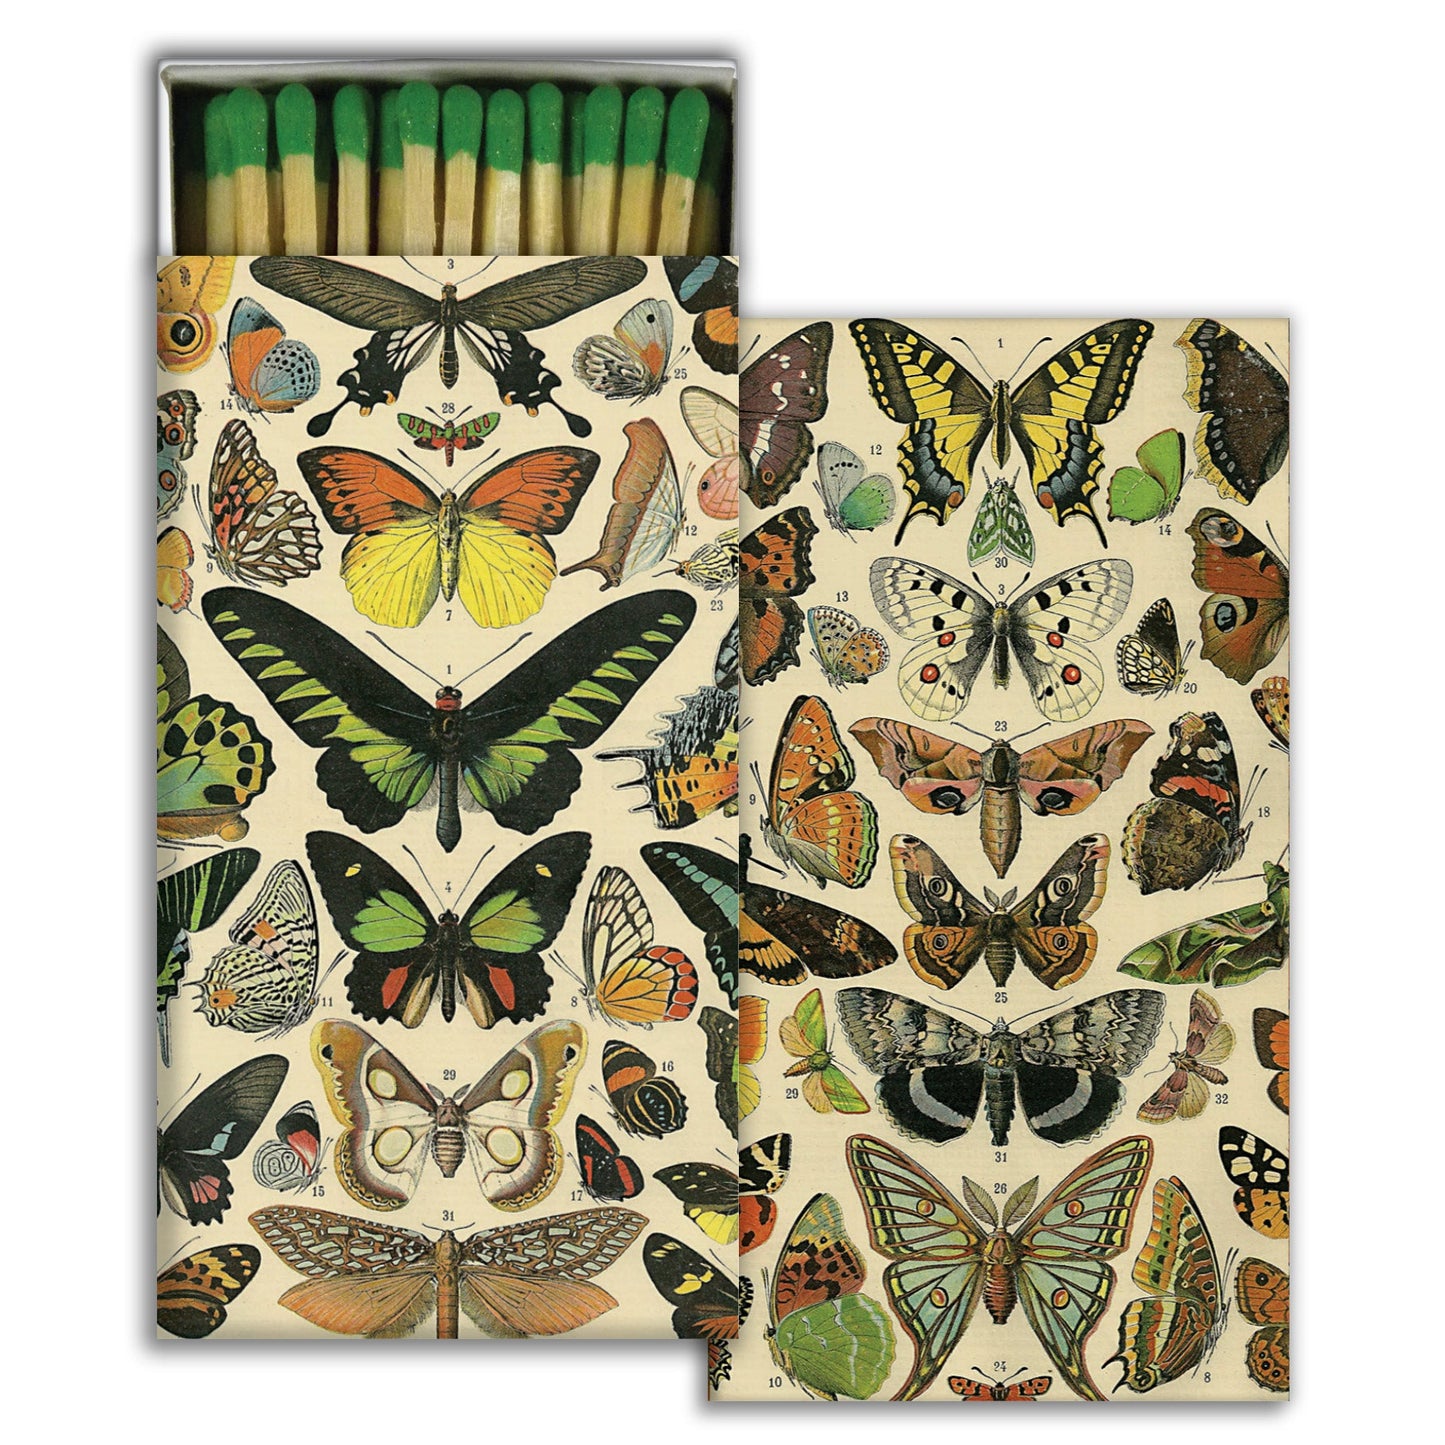 Matches - Butterfly Specimens